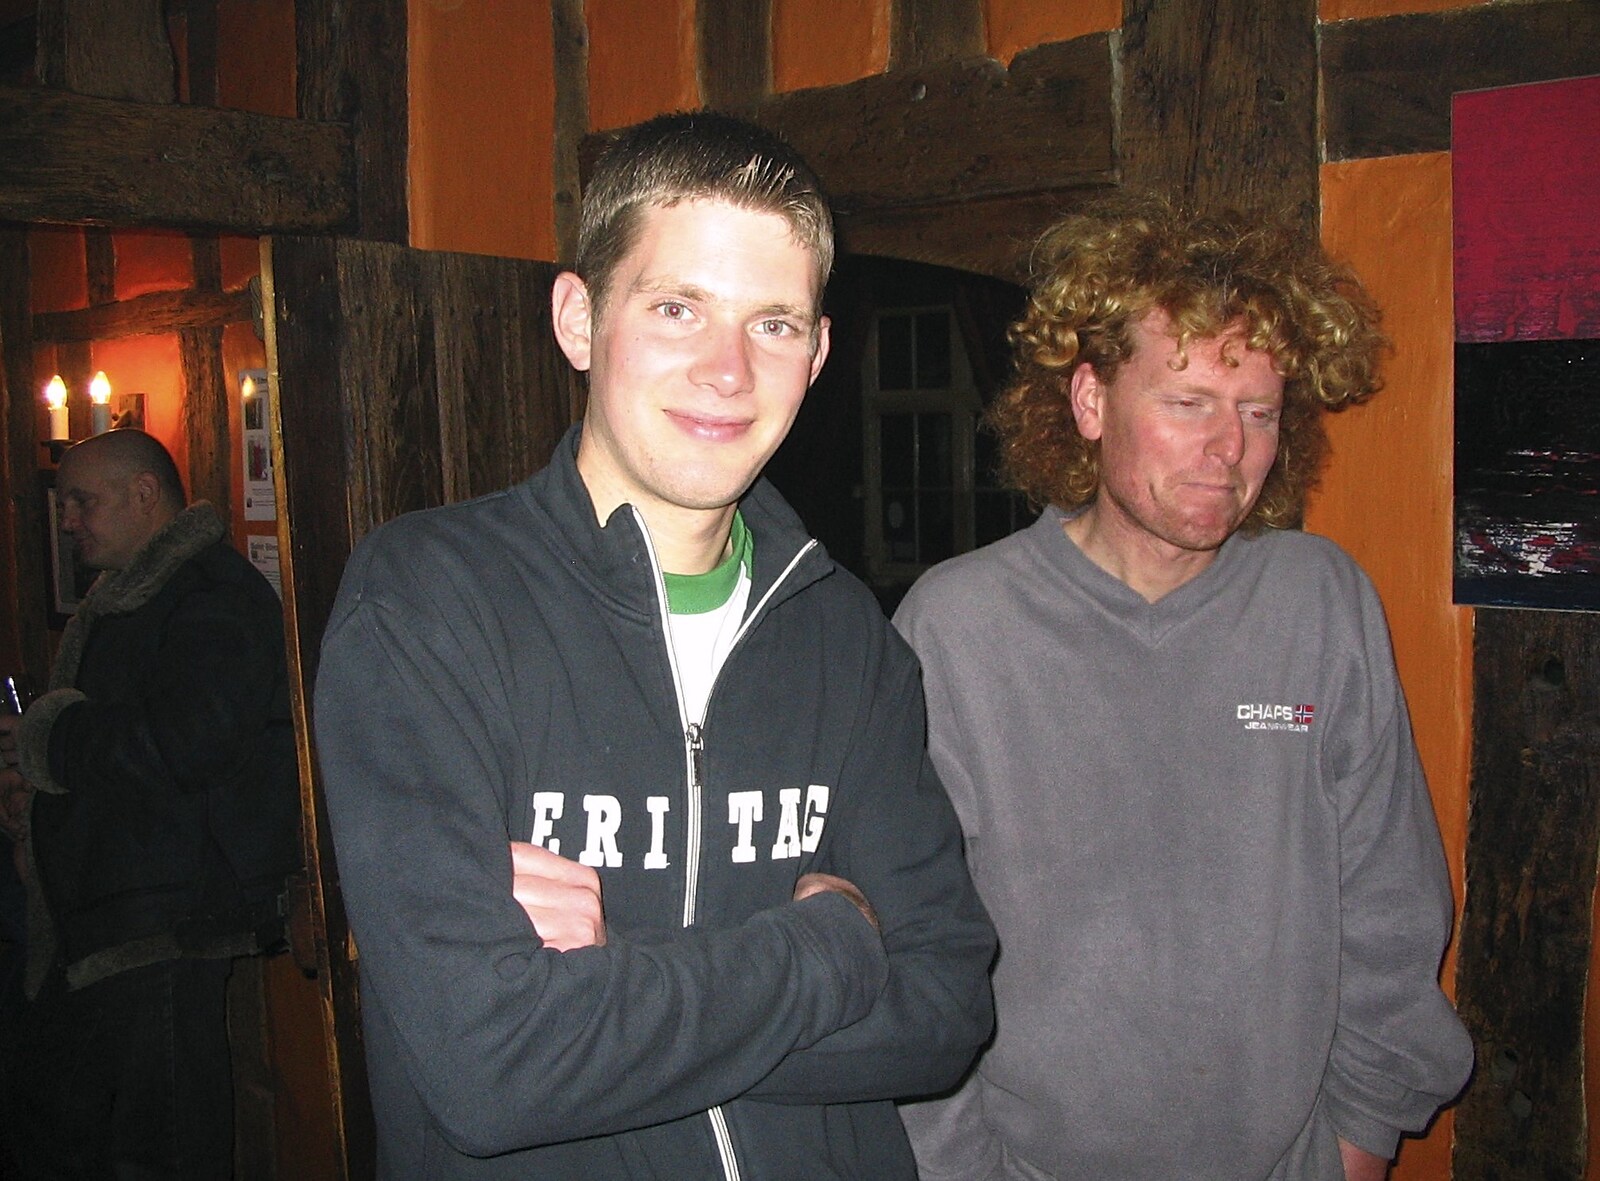 The Boy Phil and Wavy from The Hoxne Swan Beer Festival, Hoxne, Suffolk - 20th November 2004